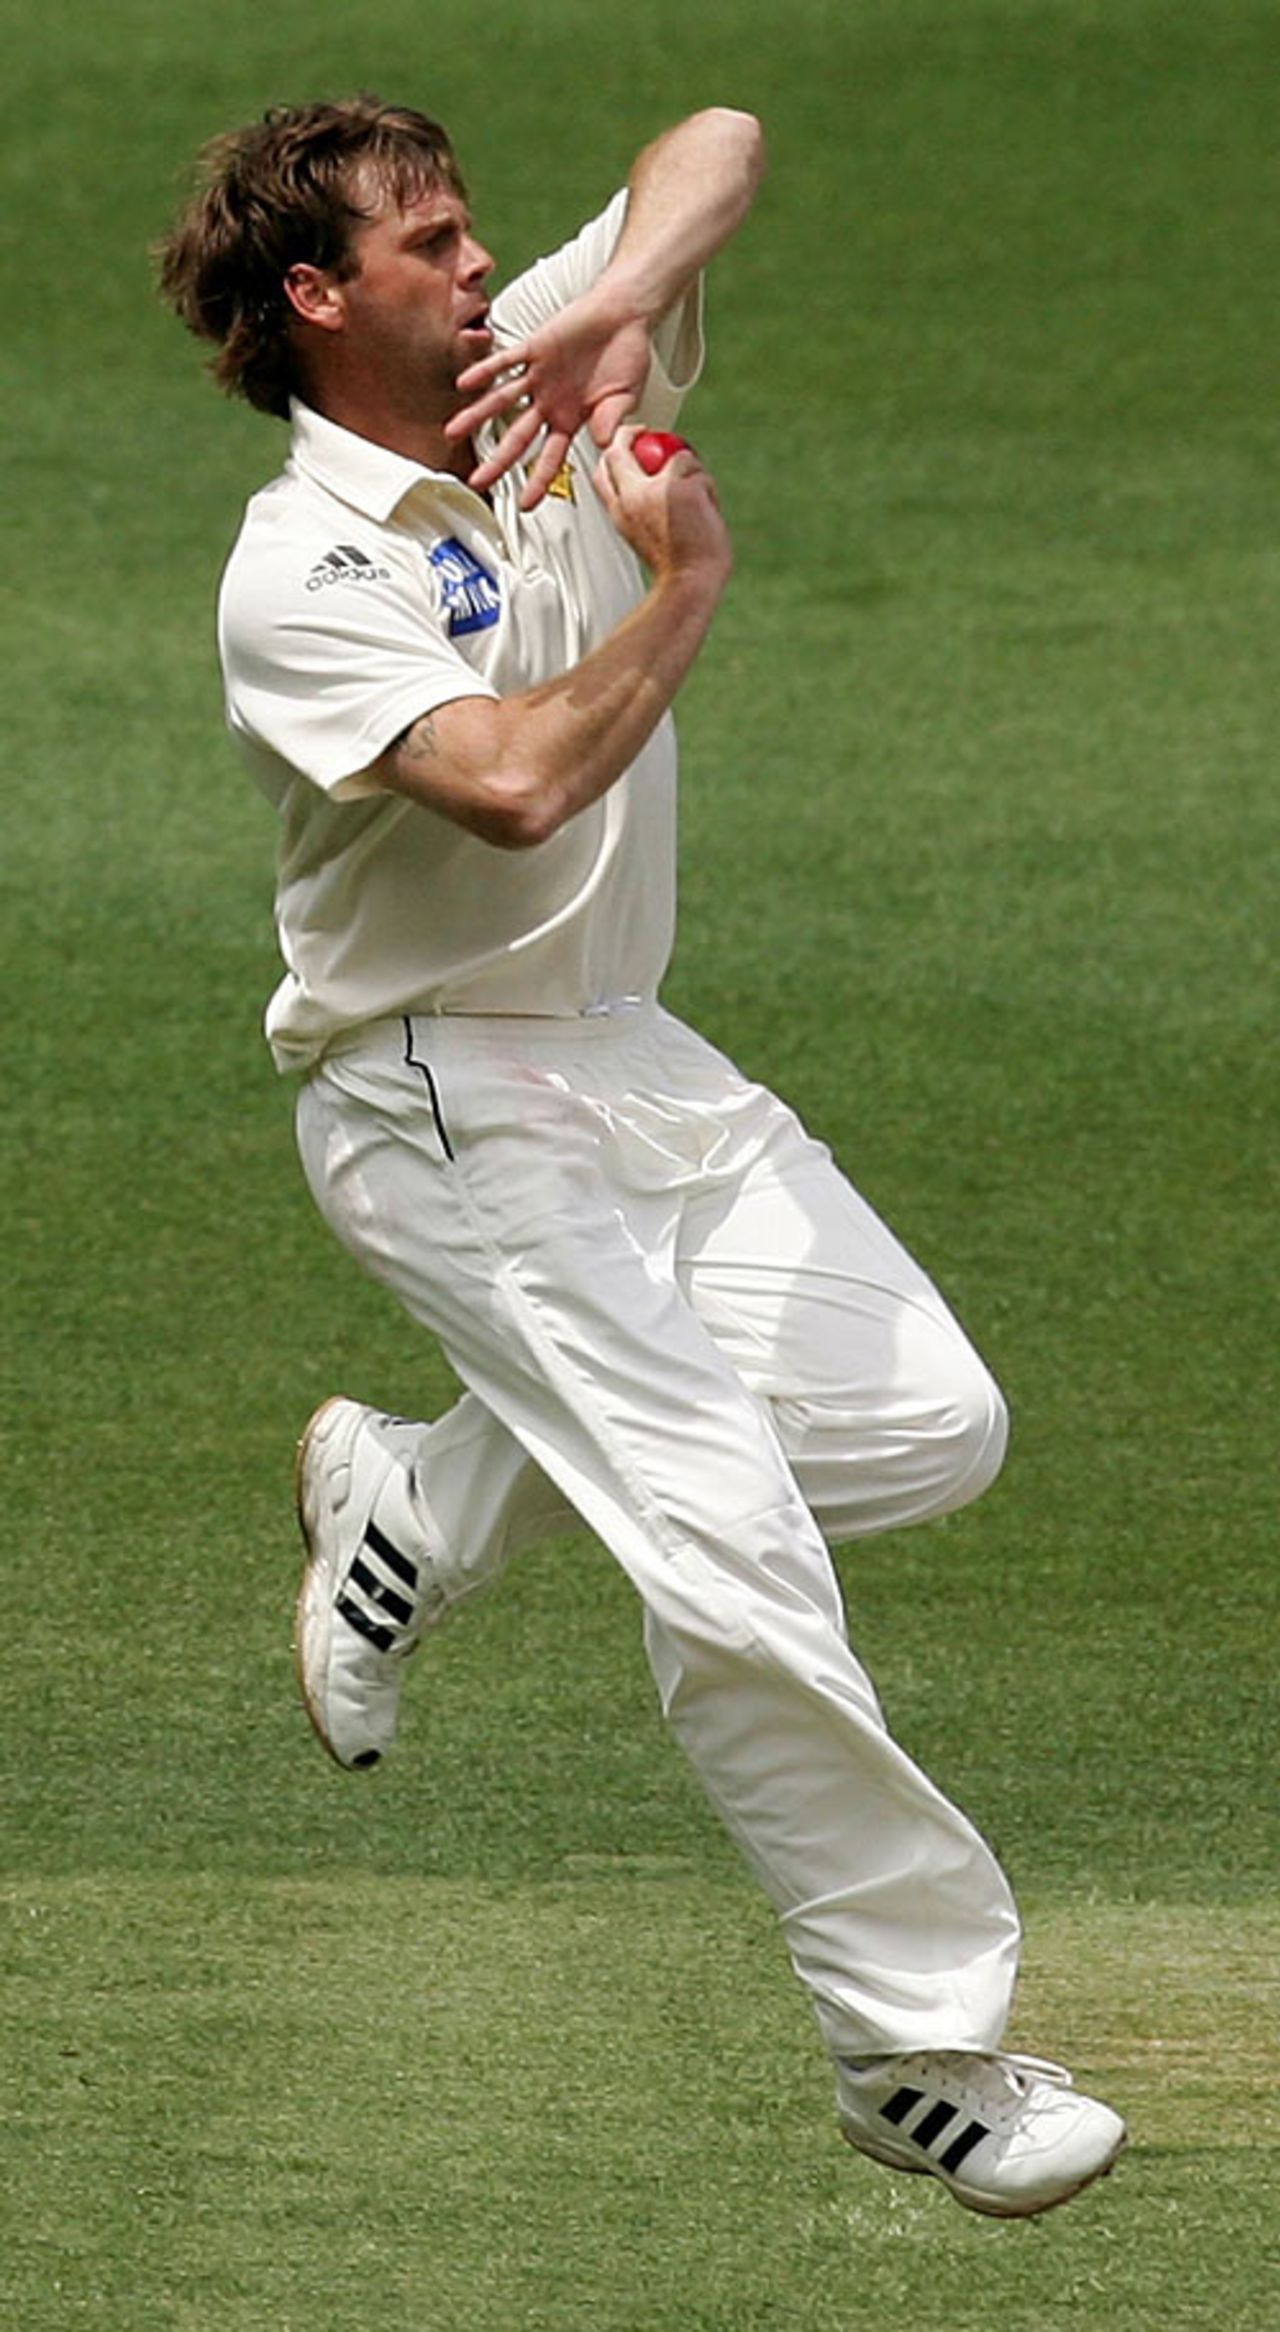 Shane Harwood about to deliver a ball, Victoria v New South Wales, Pura Cup, Melbourne, December 15, 2006